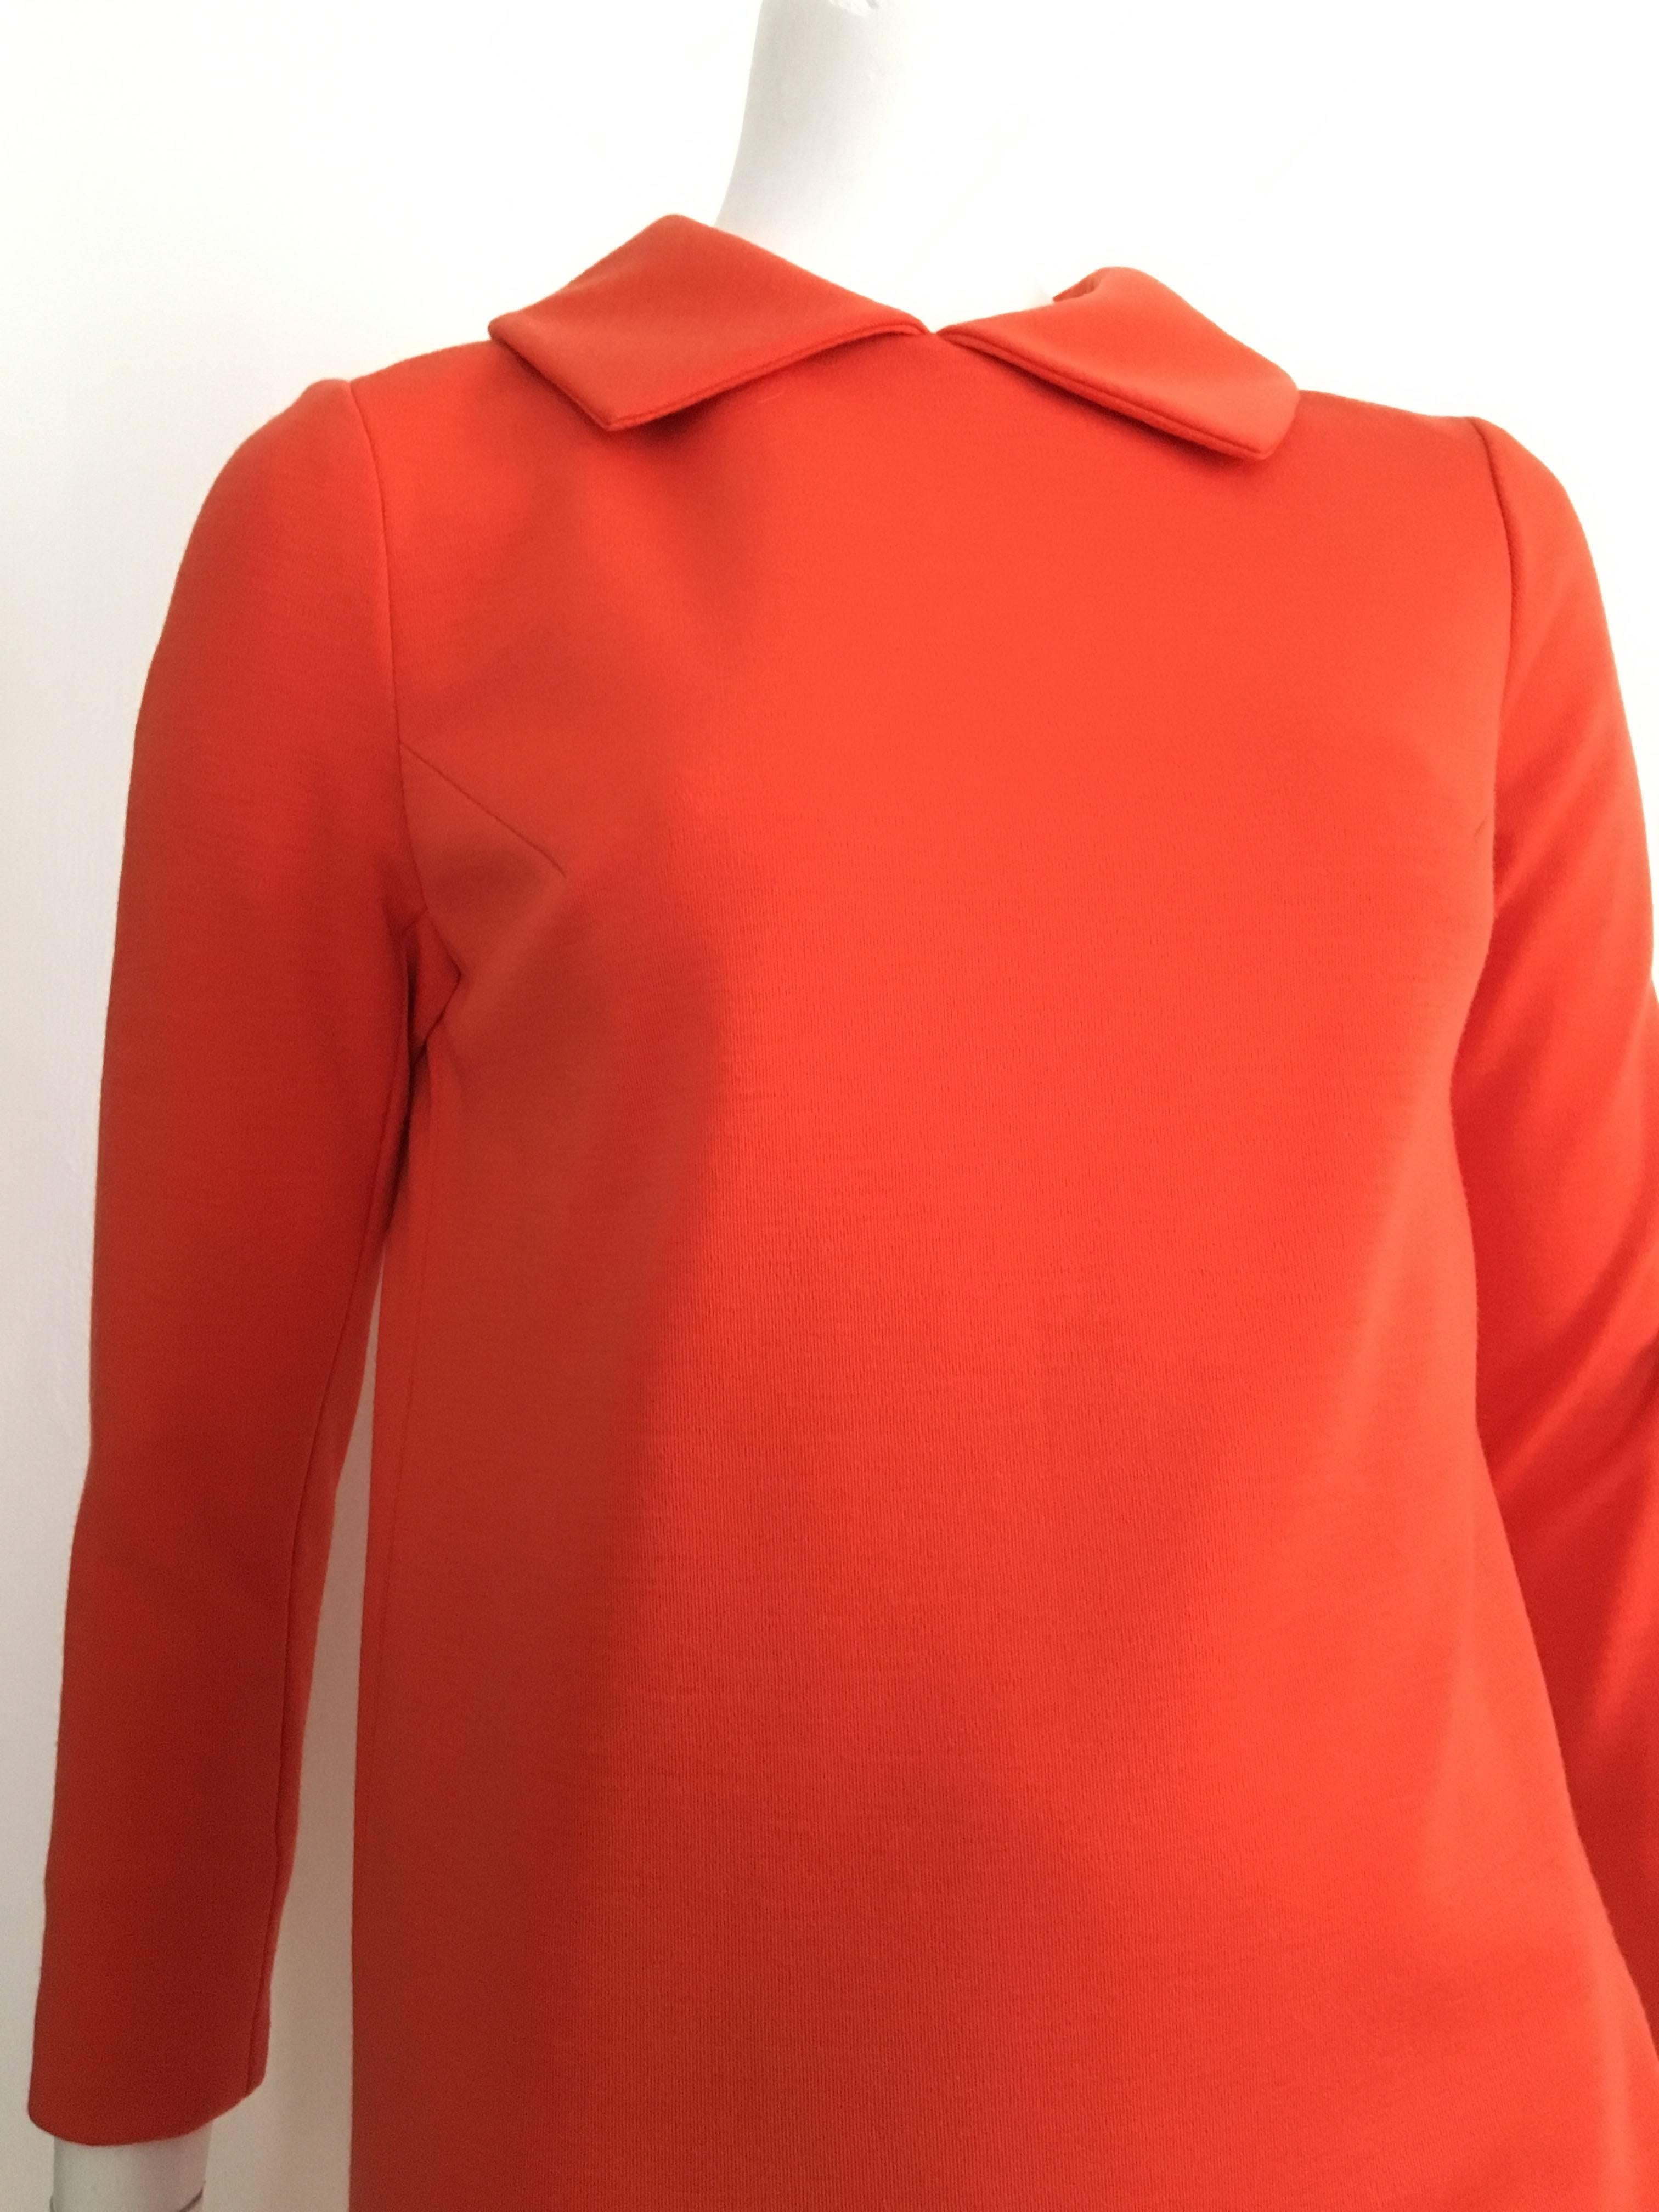 Bill Blass for Maurice Rentner 1960s orange wool knit dress is a vintage size 10 but fits like a modern USA size 6.  Please see & use the measurements listed below so you can properly measure your lovely body to make certain this will fit you the